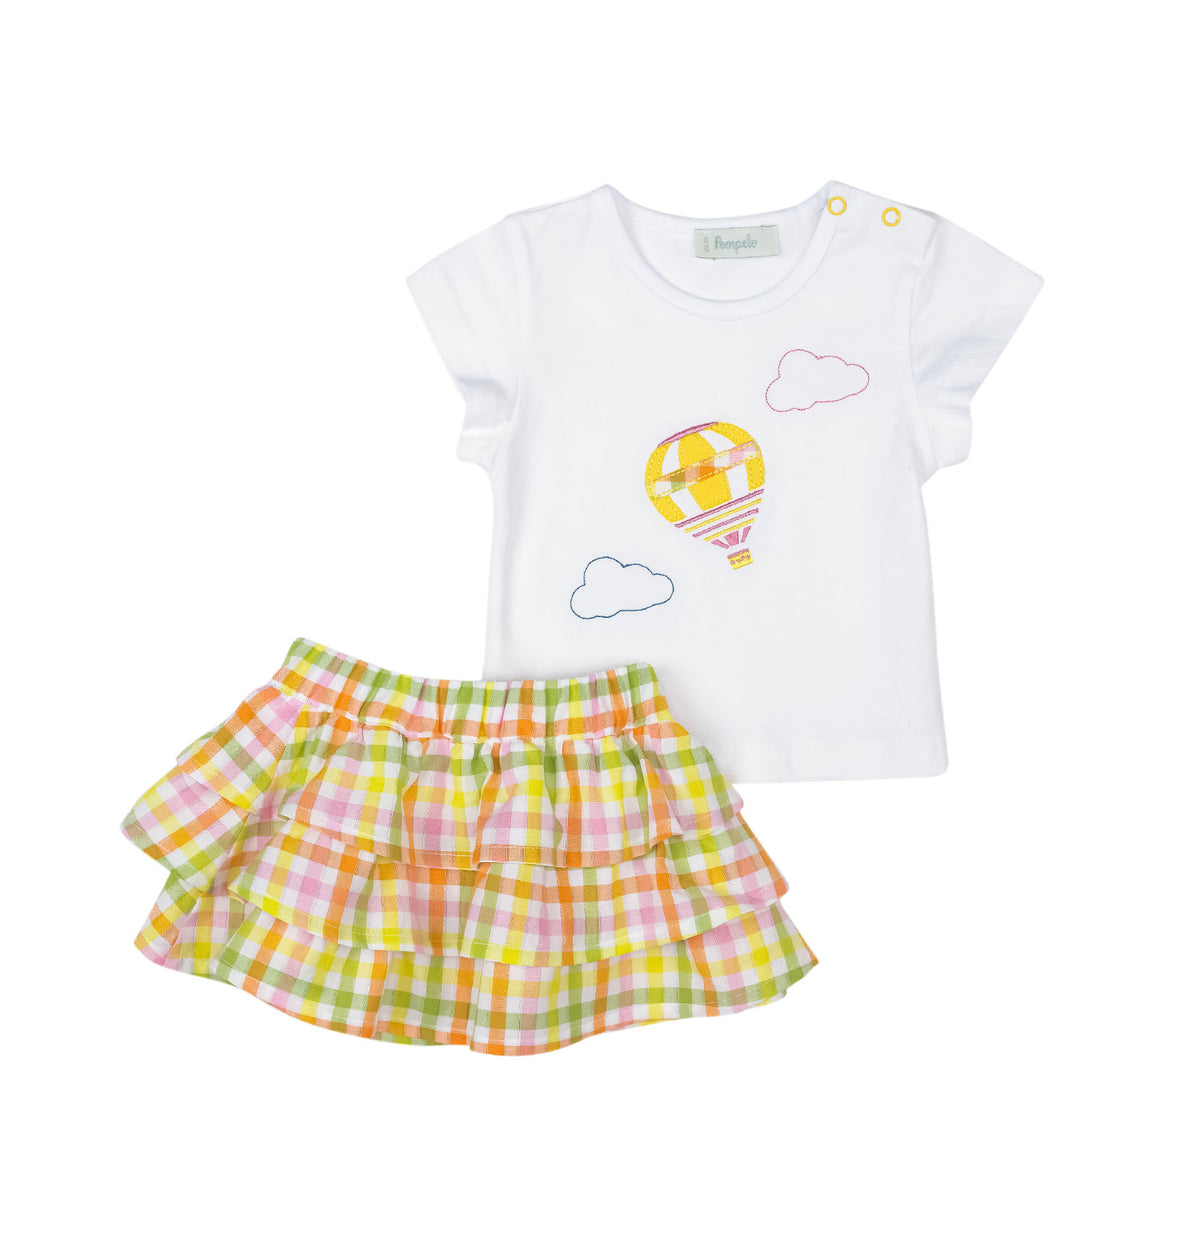 Modish summer colorful baby girl set by Pompelo